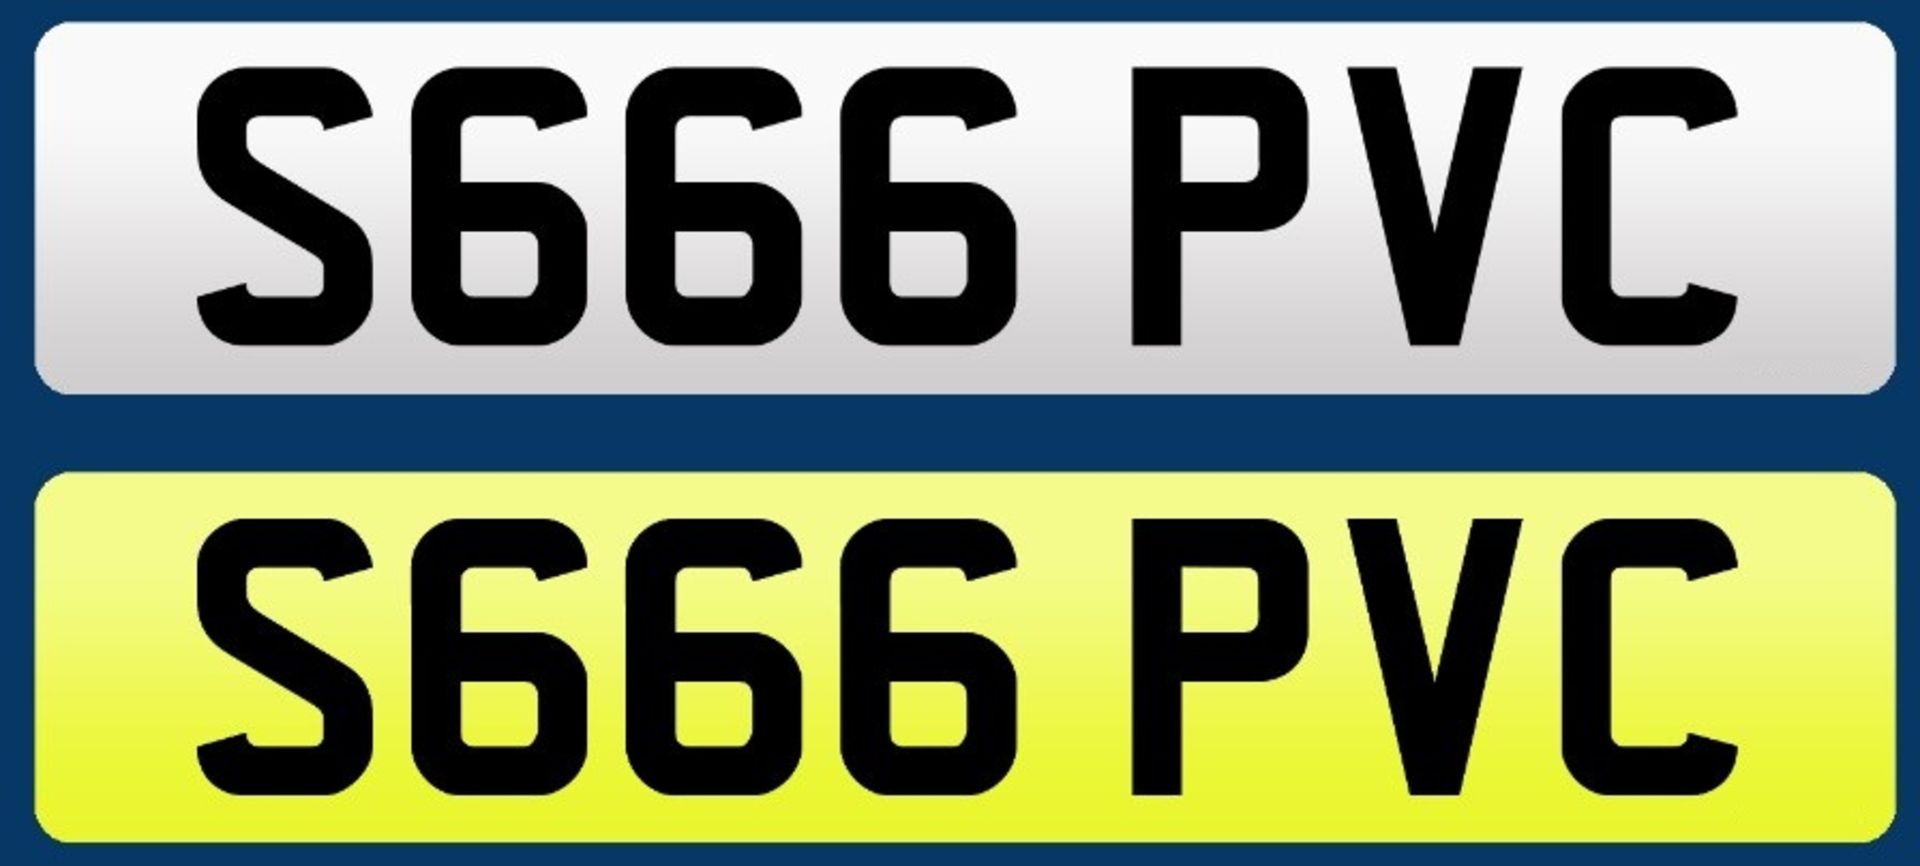 CHERISHED REGISTRATION NUMBER: S666 PVC, to be assigned before 06-11-2030.